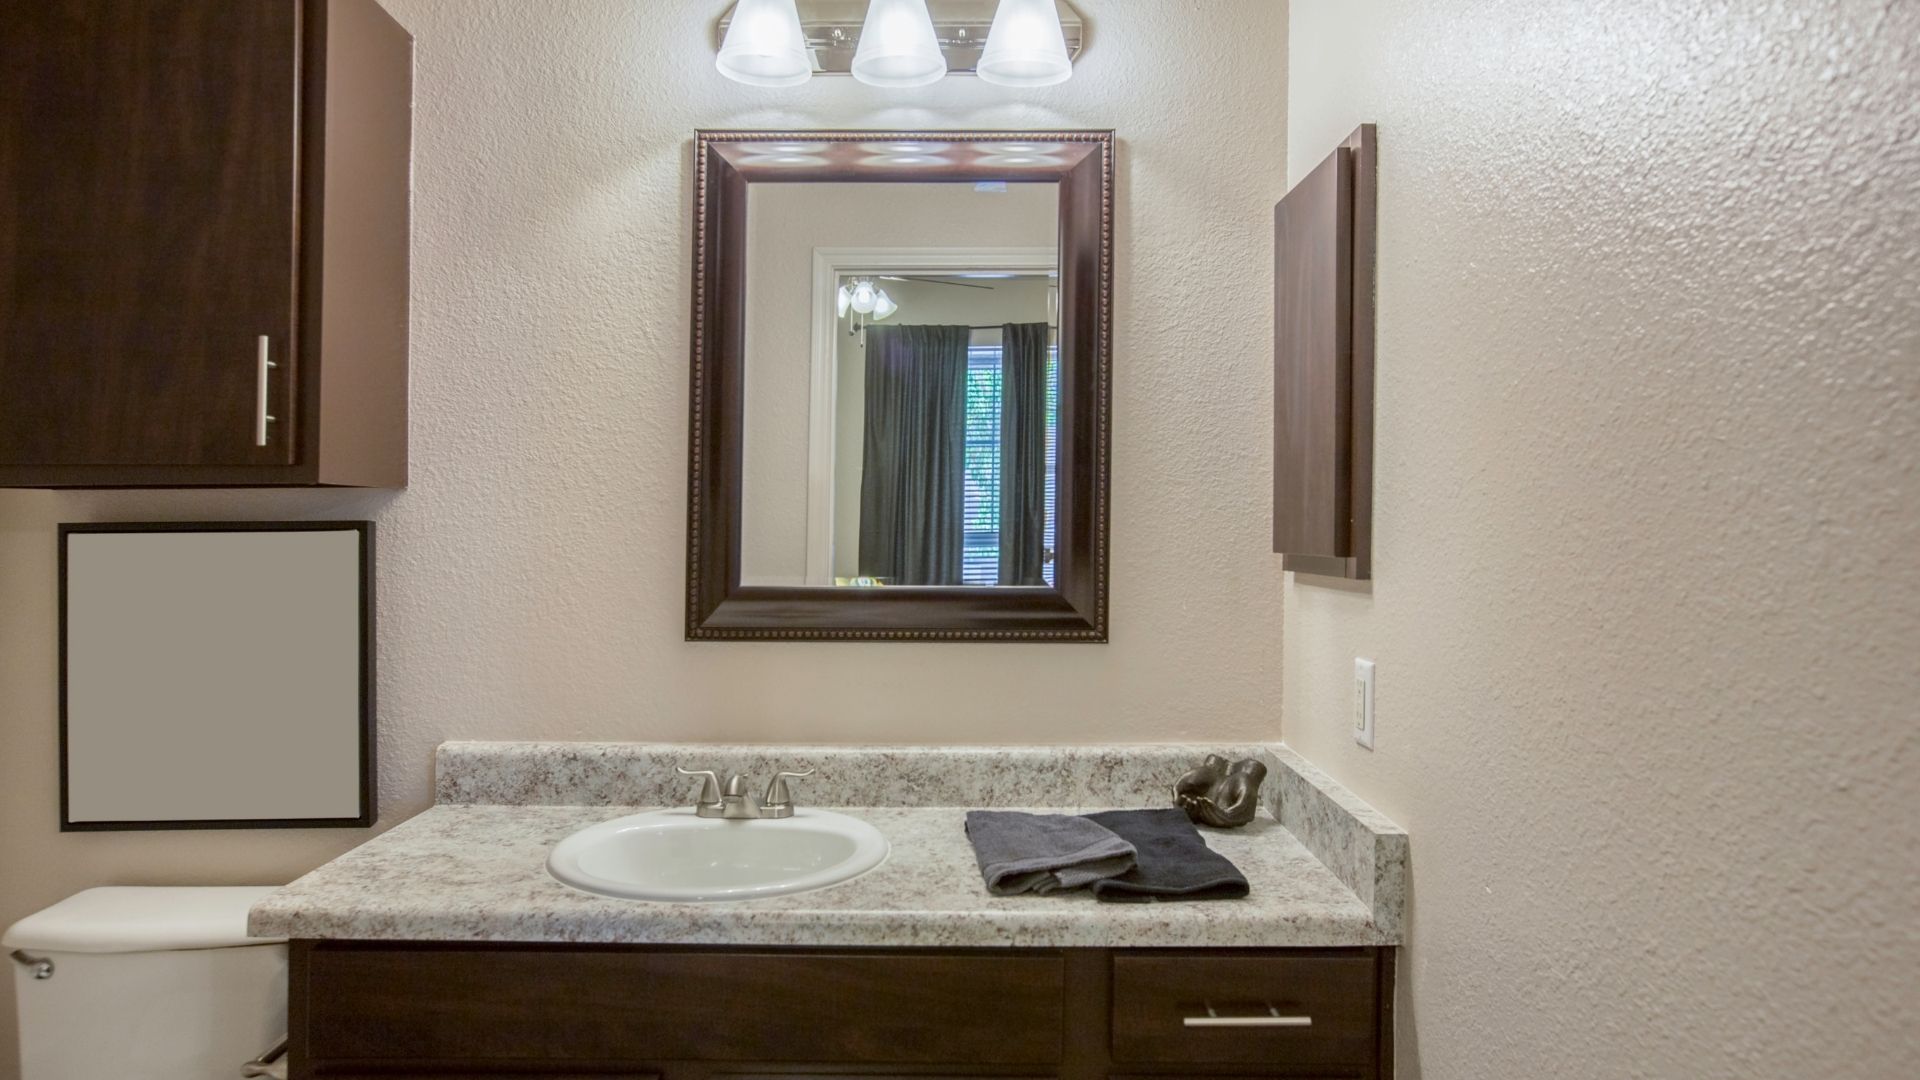 How can you make the most out of your small bathroom